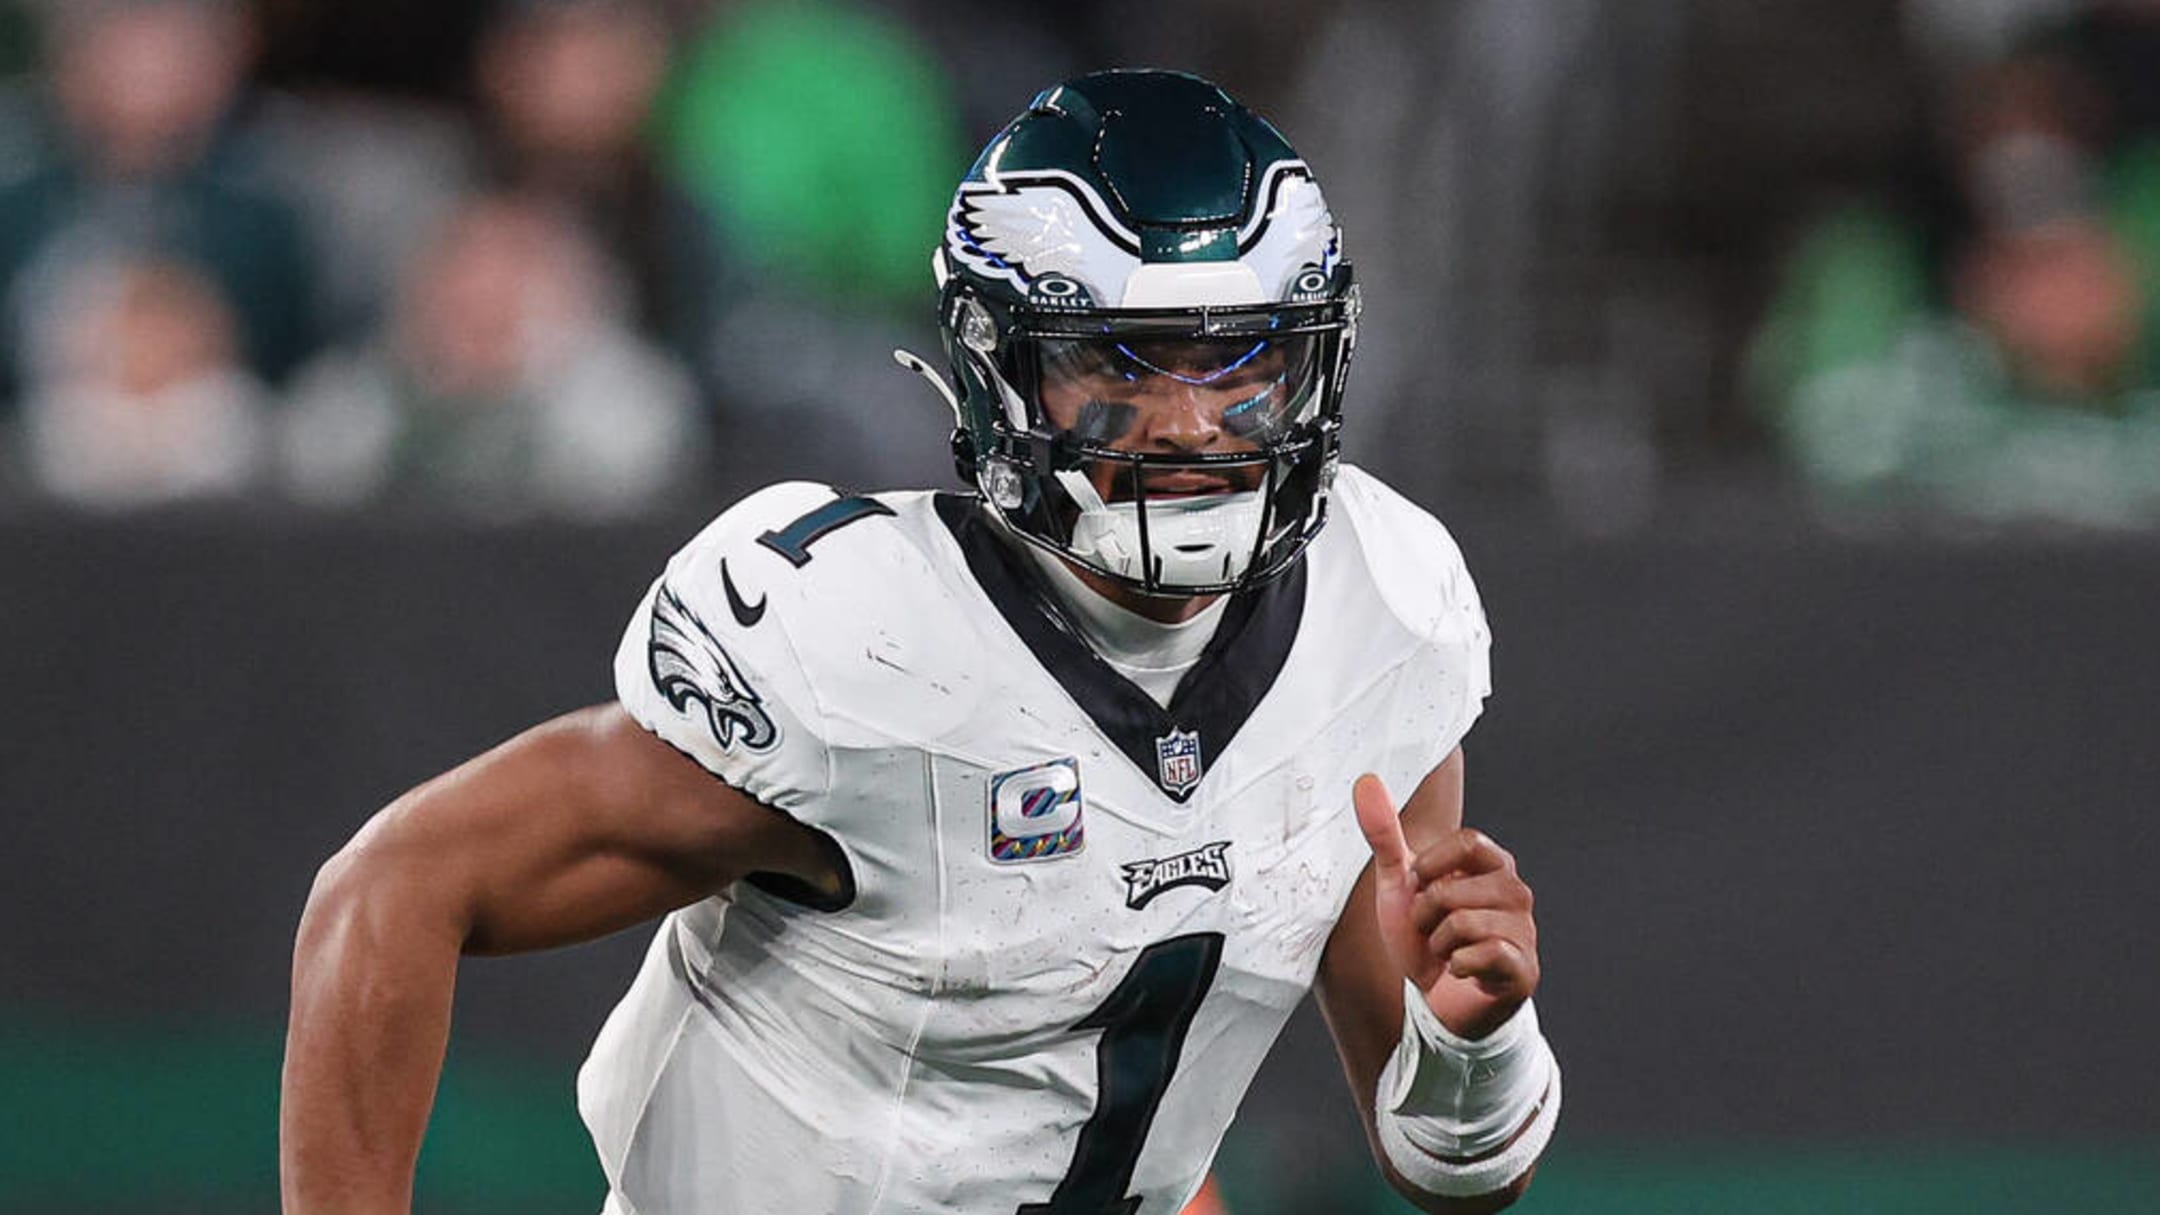 NFC East Round-Up: Eagles still have an edge but can't afford to